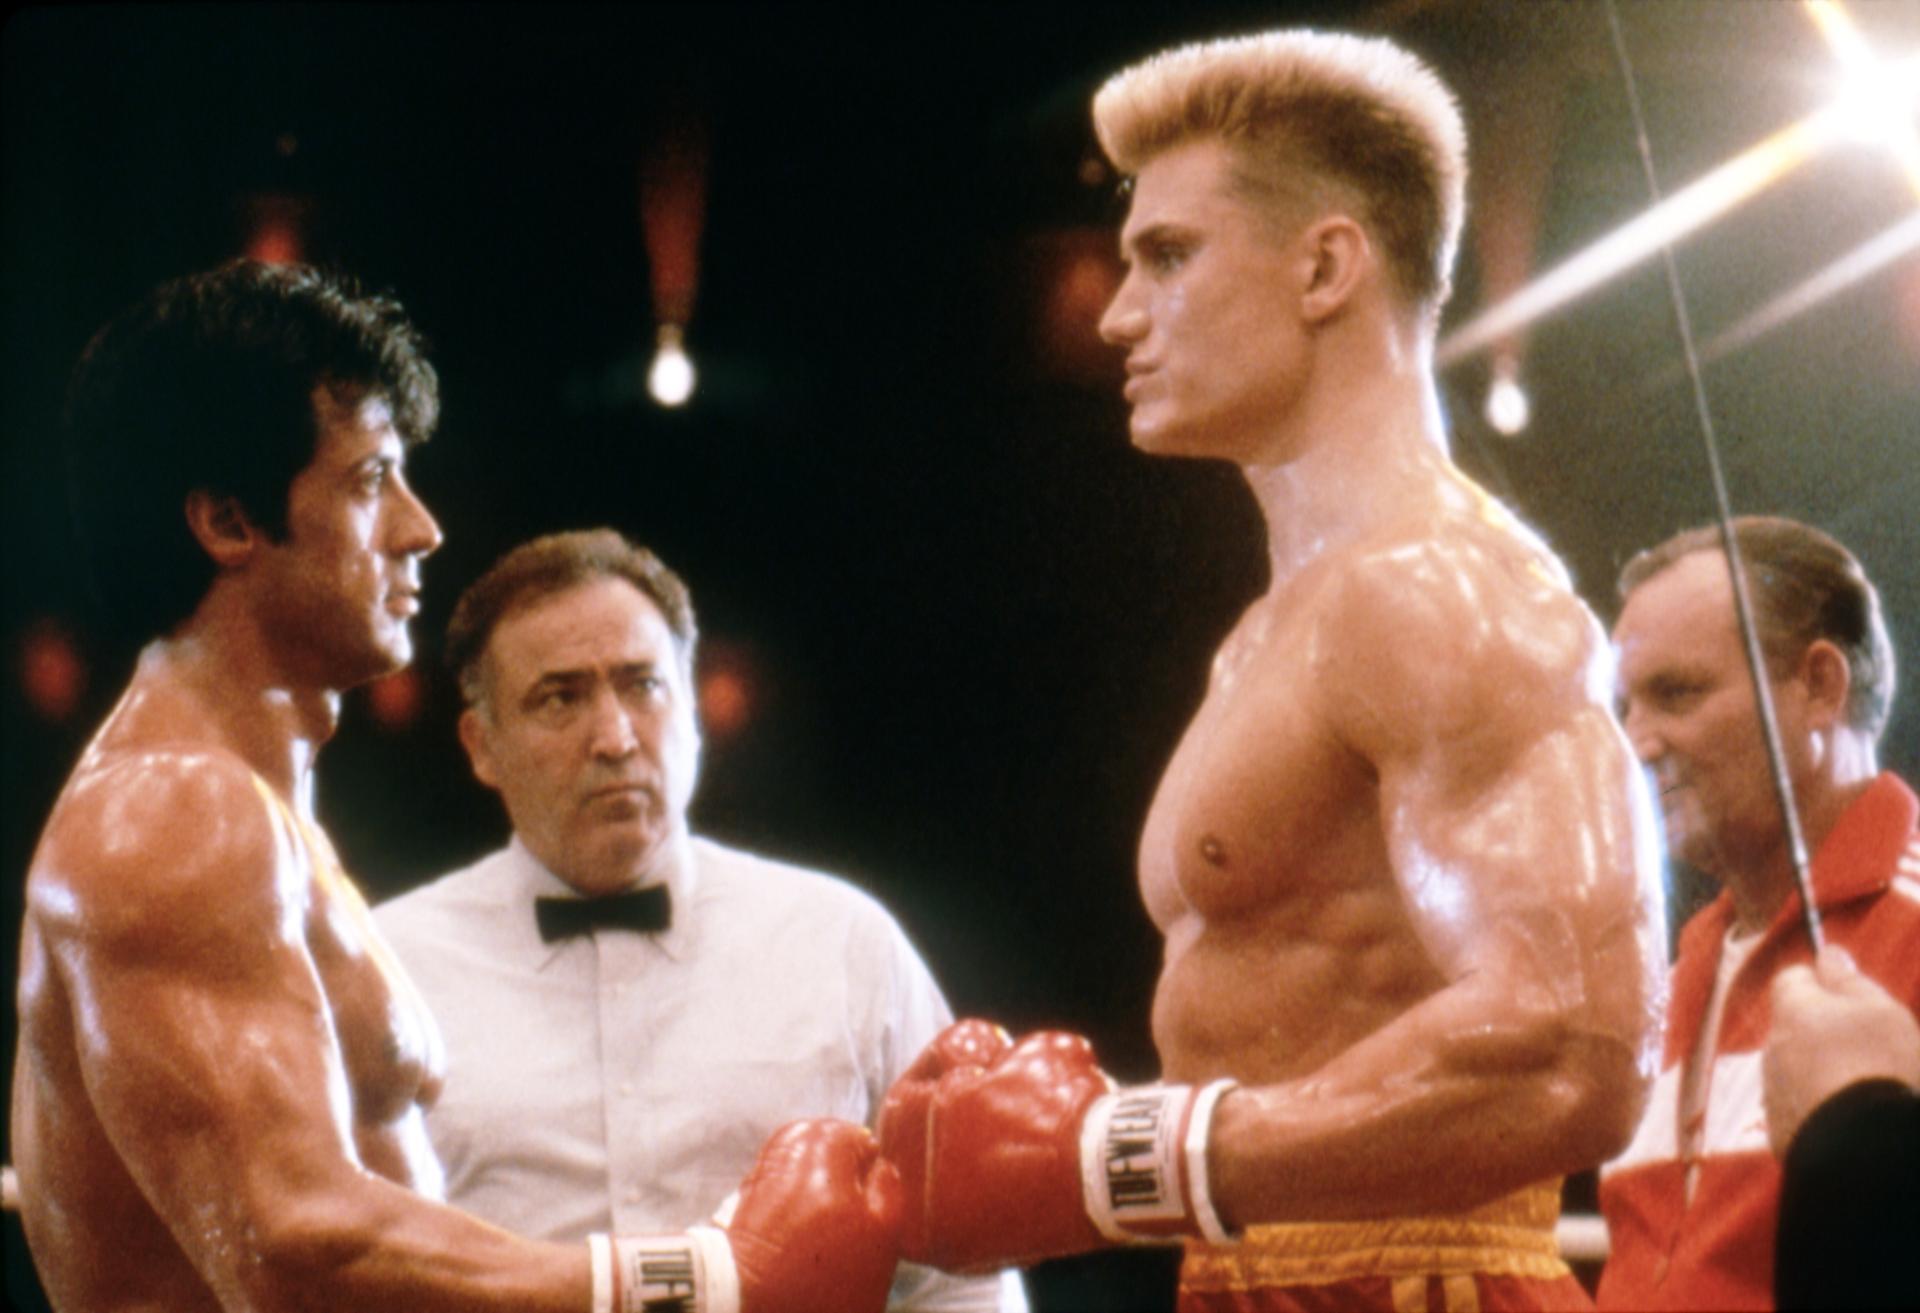 Dolph Lundgren goes another round as Rocky's old nemesis Ivan Drago